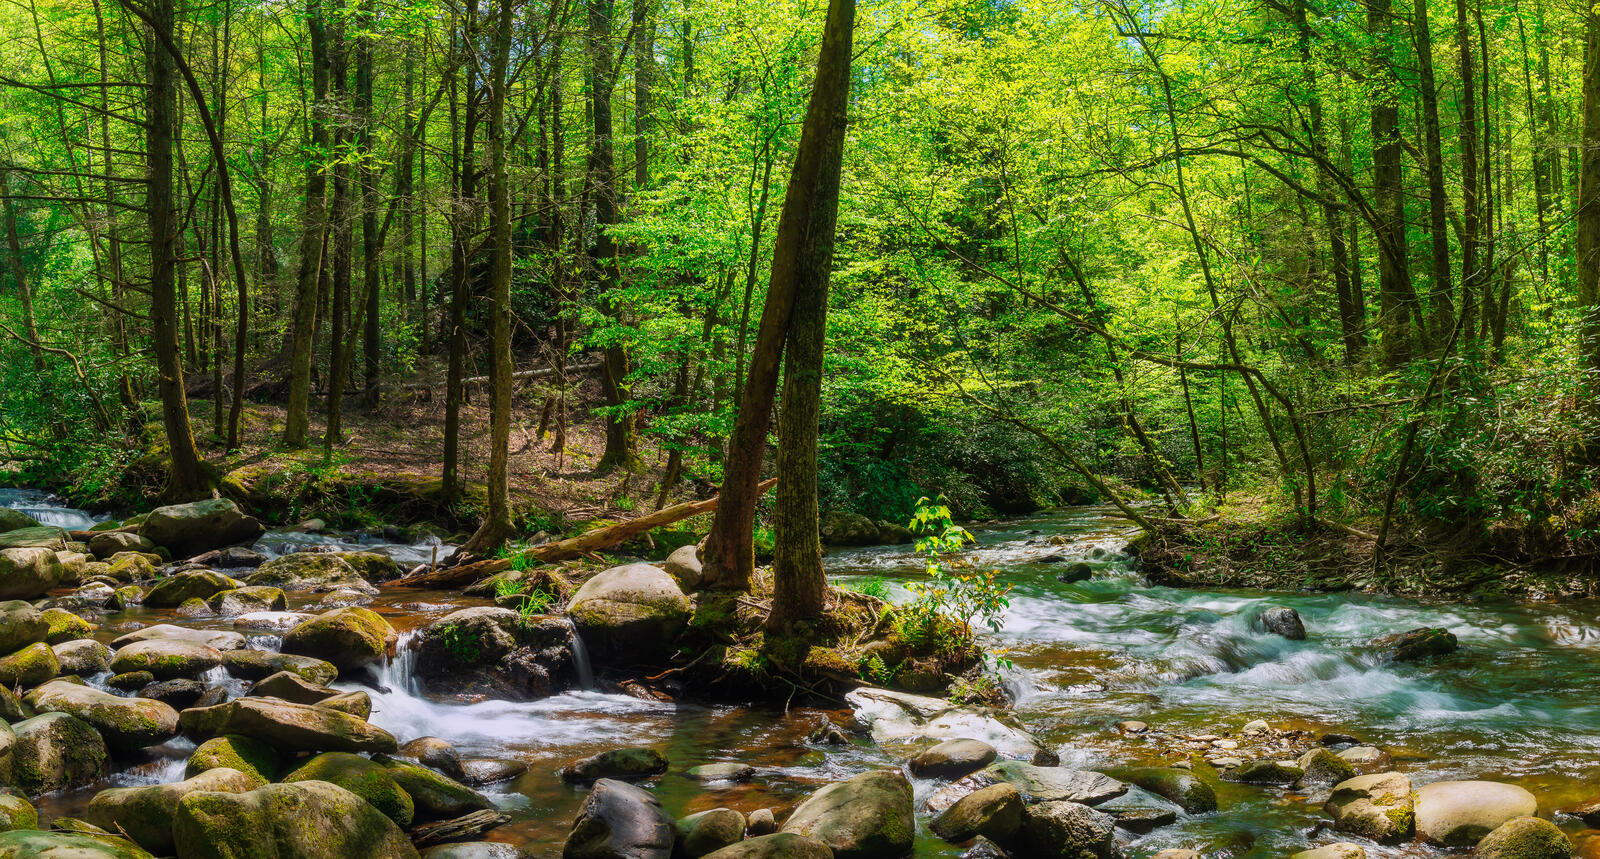 Wallpapers nature trees Great Smoky Mountains National Park on the desktop